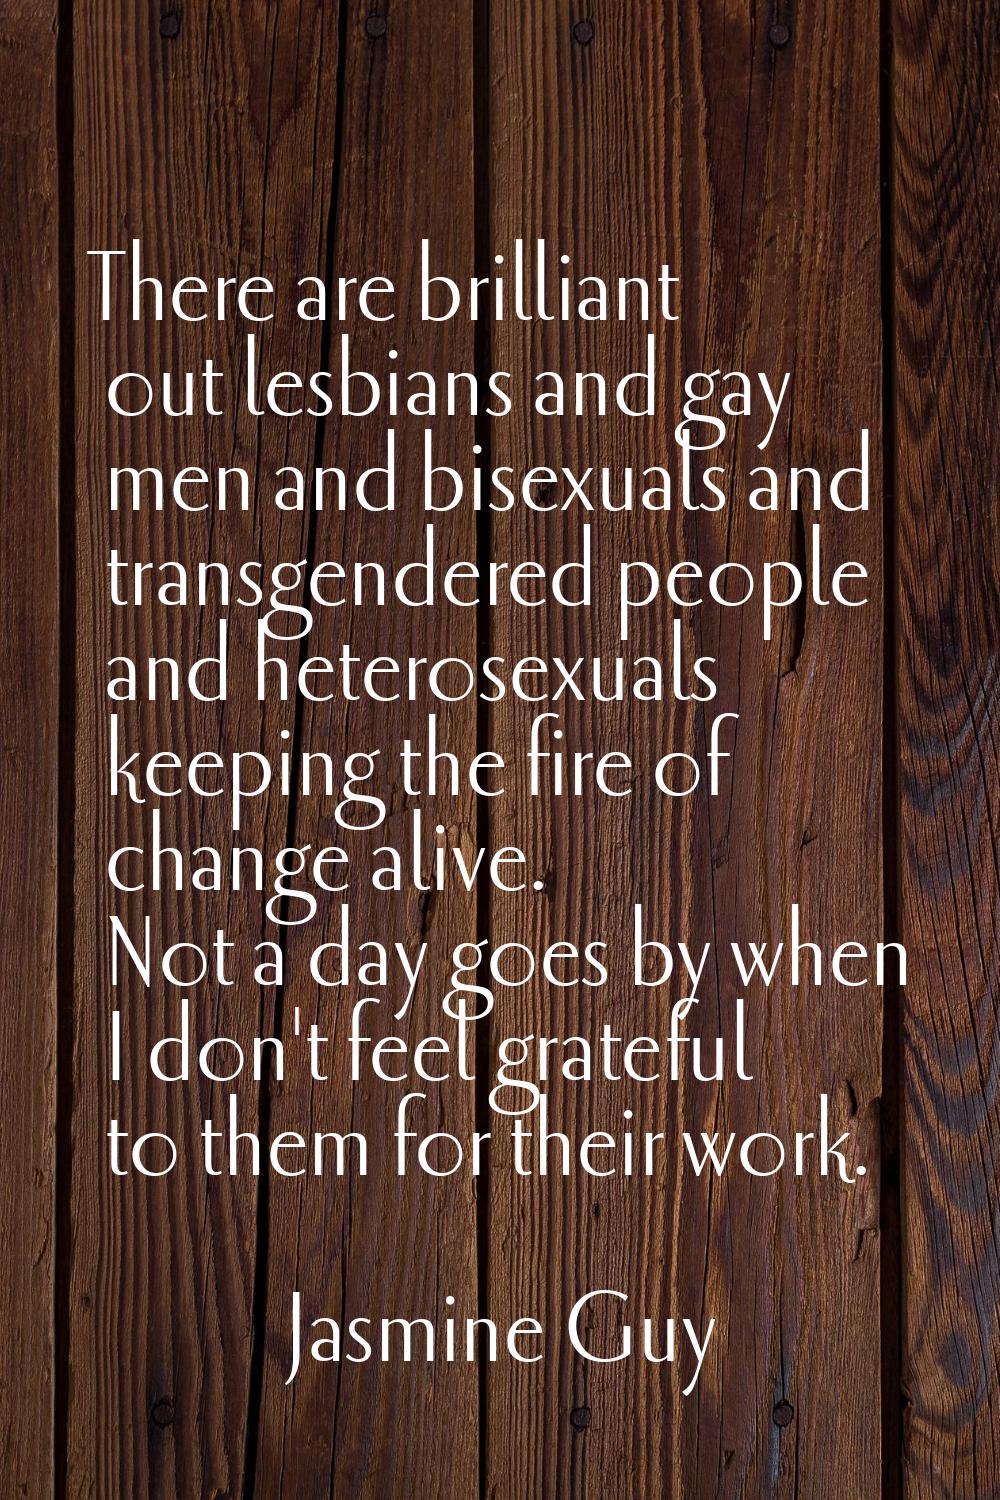 There are brilliant out lesbians and gay men and bisexuals and transgendered people and heterosexua